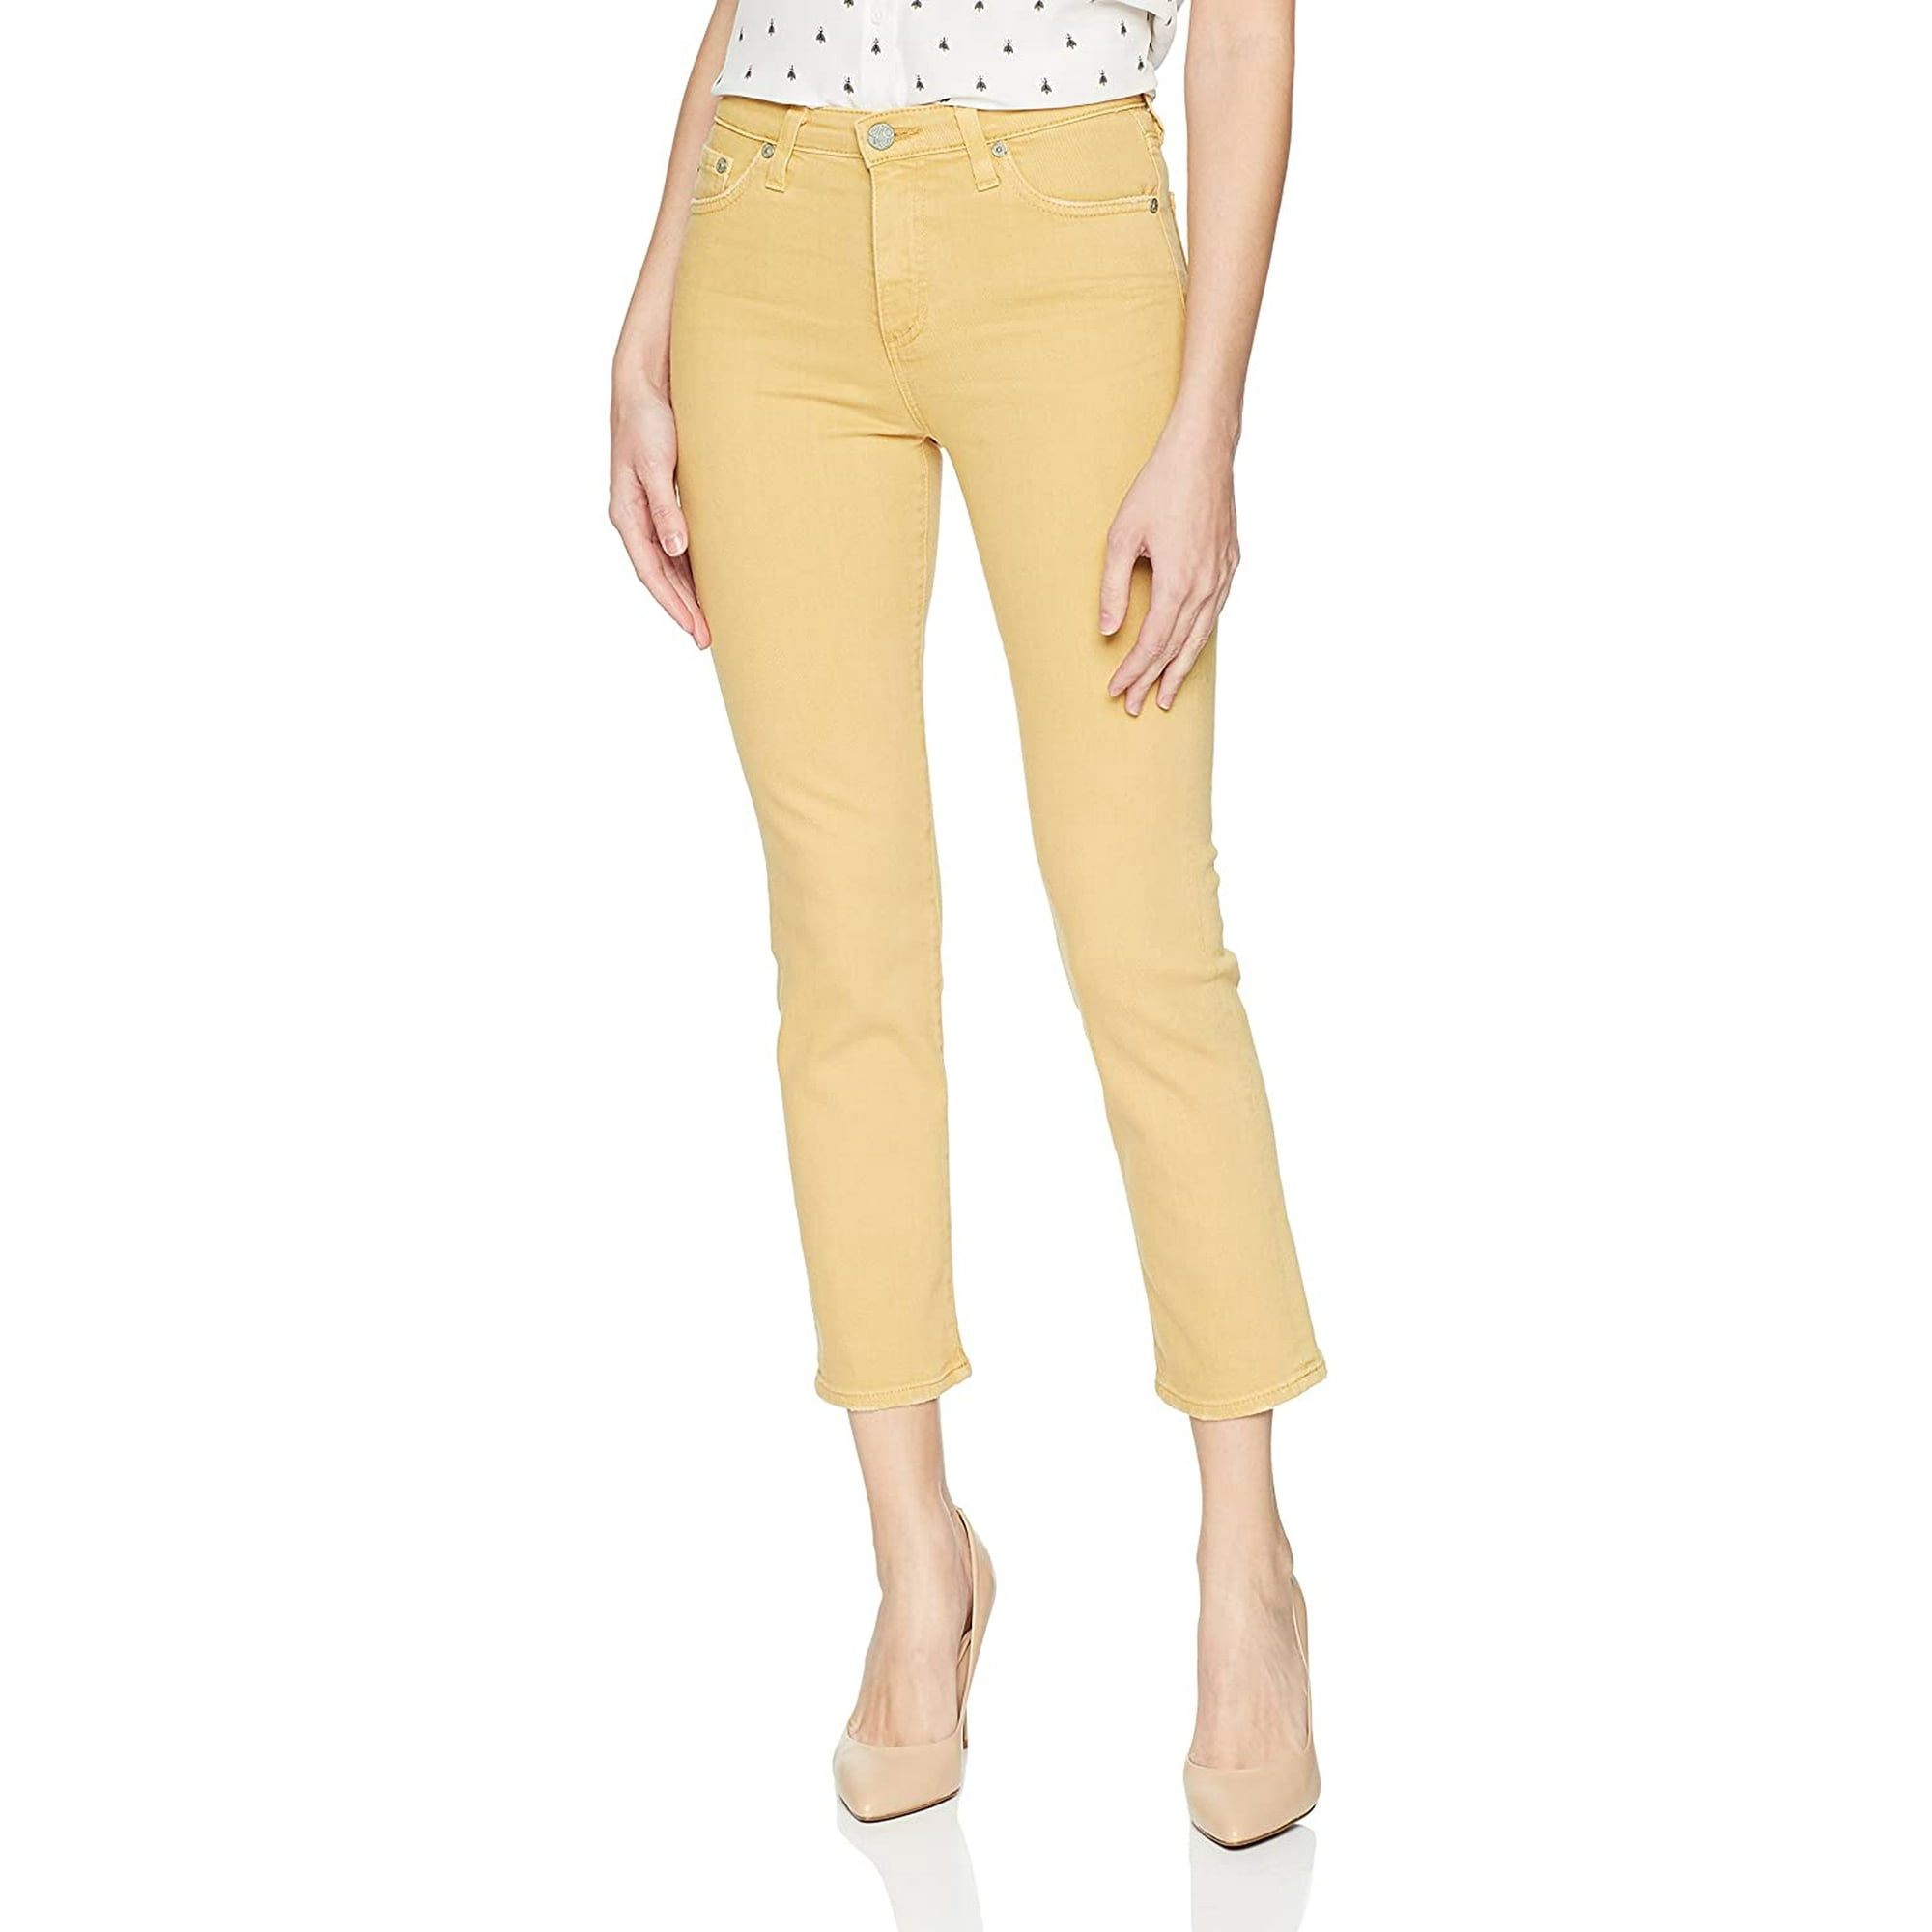 AG Adriano Goldschmied Women's The Isabelle High Rise Straight Jean, Year  Sulfur Golden Emmer, 26 | Walmart Canada